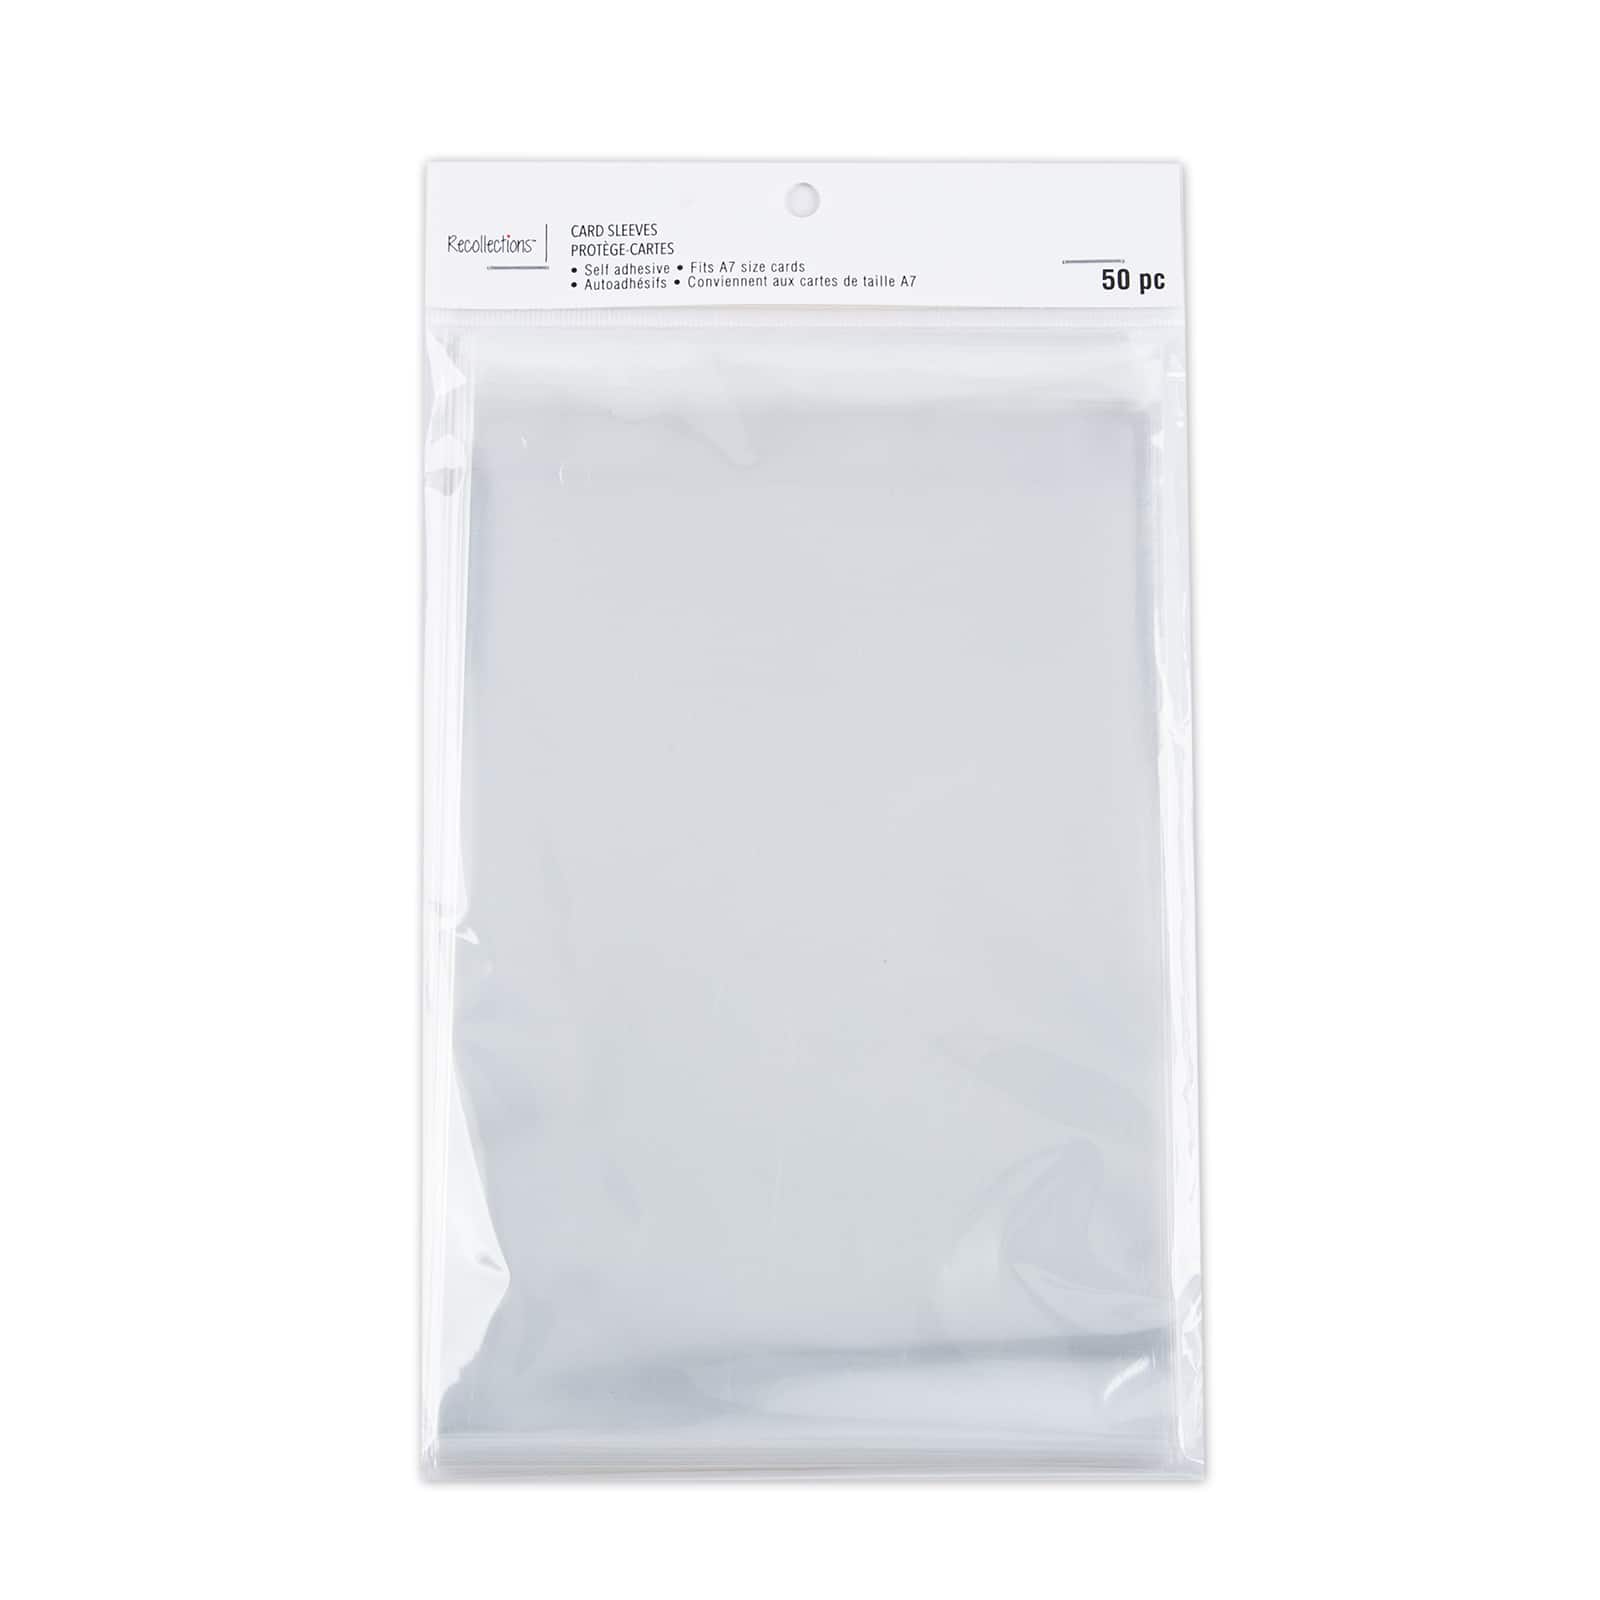 Clear Plastic Sleeve for Postcard storage Small Medium Large Extra Large 